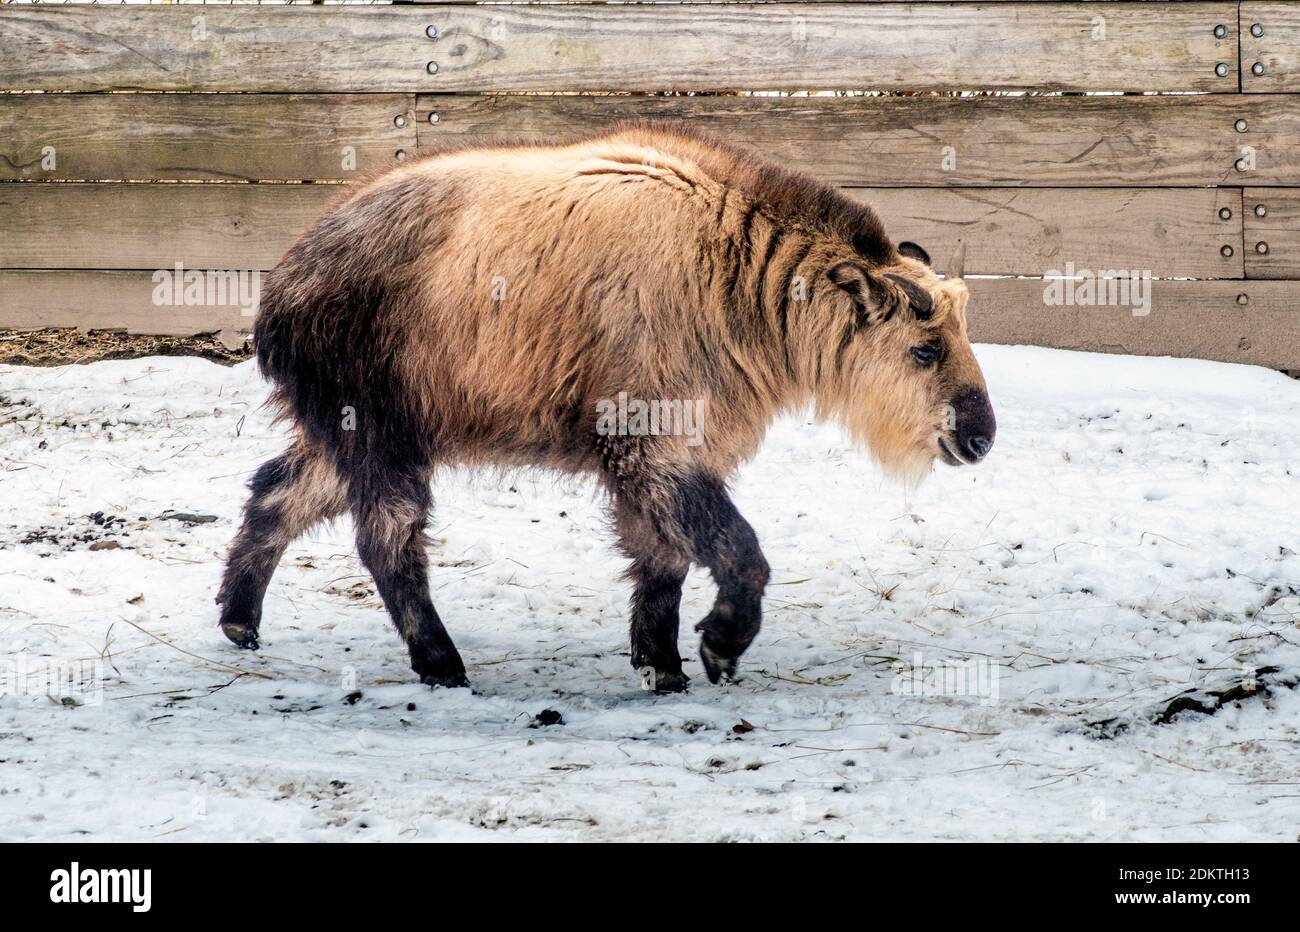 A Furry Takin, Also Called A Gnu Goat Or A Cattle Chamois, Walks Across A  Snowy Field Stock Photo - Alamy